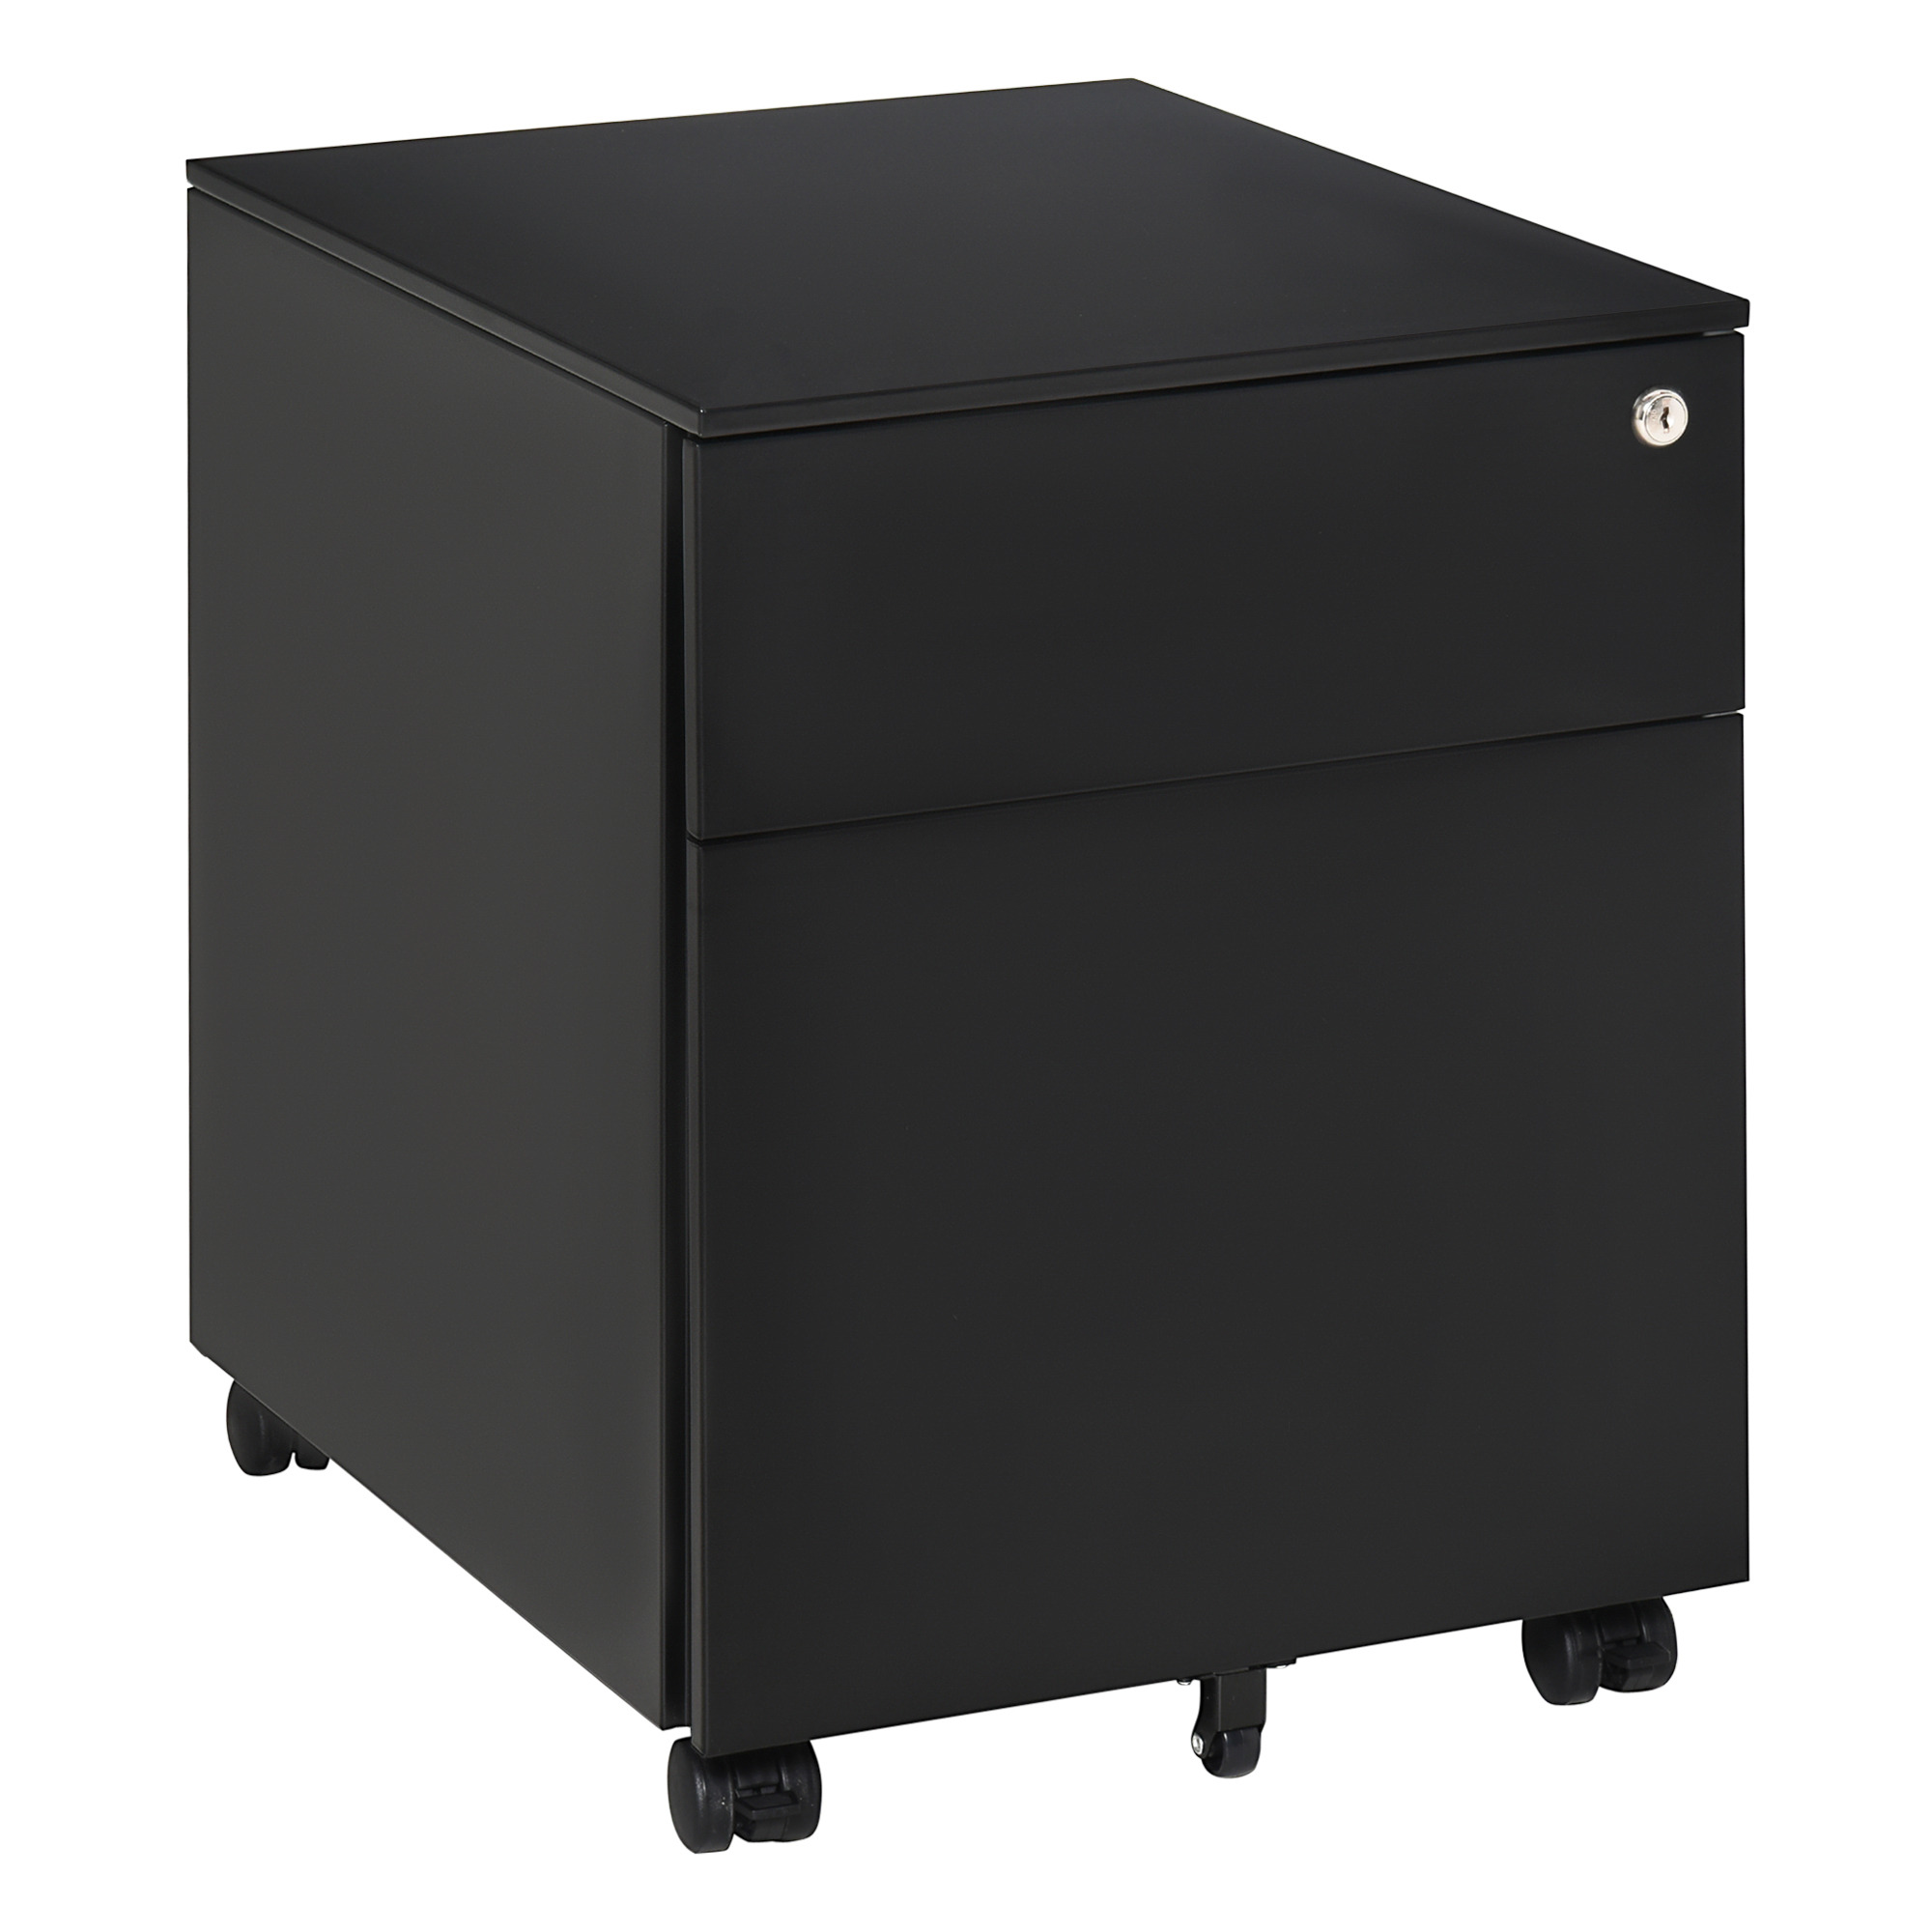 Vinsetto Vertical File Cabinet Steel Lockable with Pencil Tray and Casters Home Filing Furniture for A4, Letters, Legal-sized Files, 39 x 48 x 48.5cm